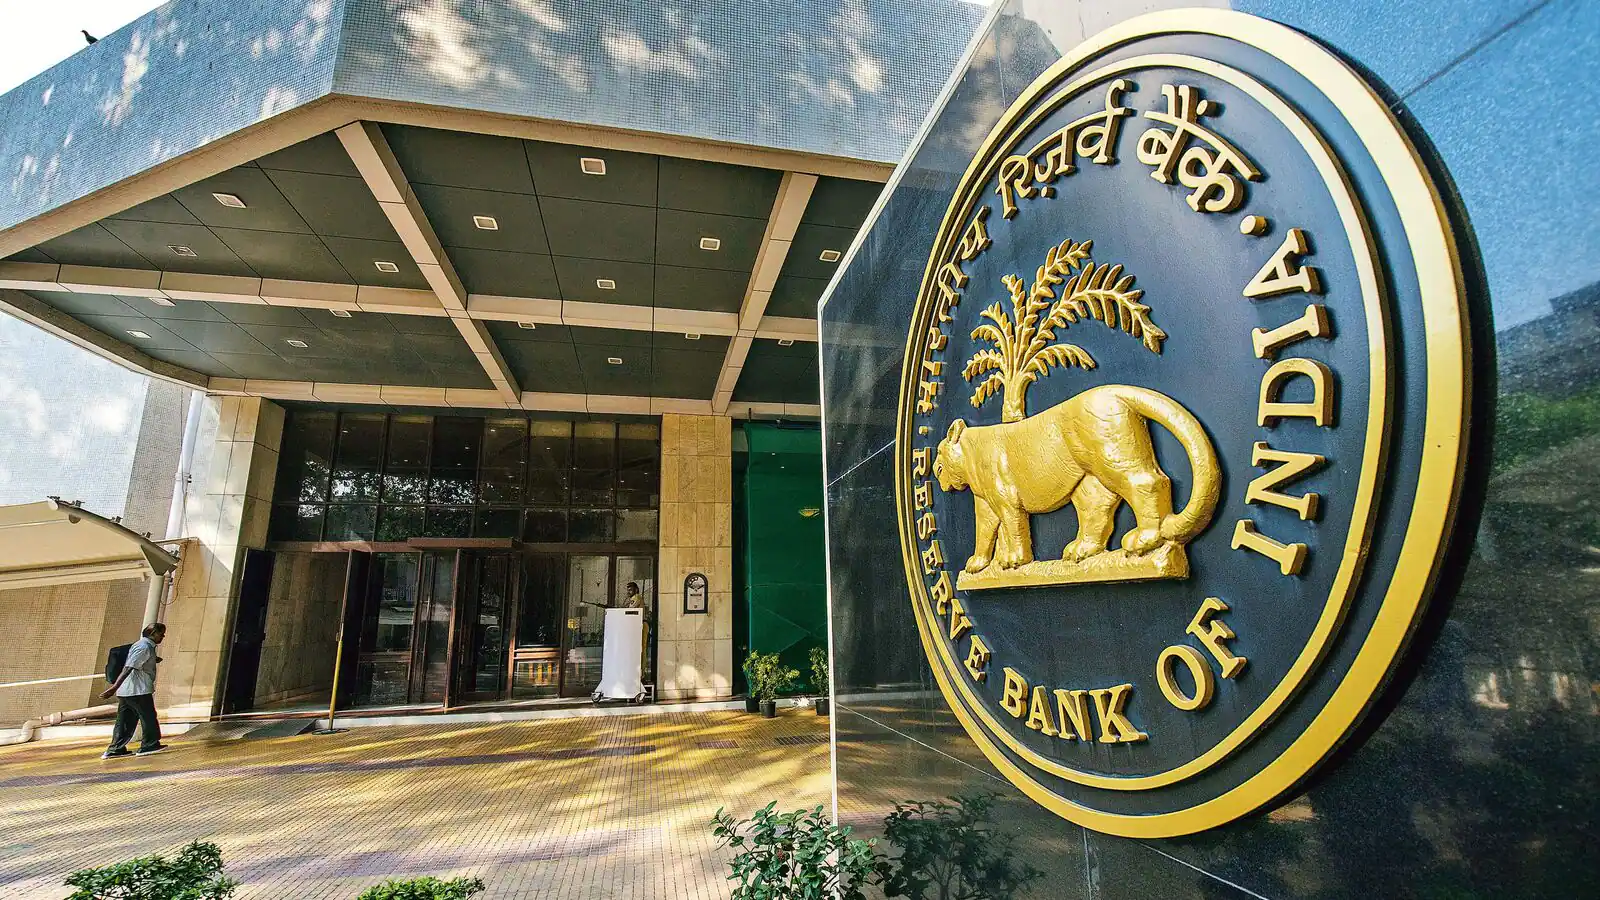 ‘Economic revival likely at risk from global spillovers’: RBI report